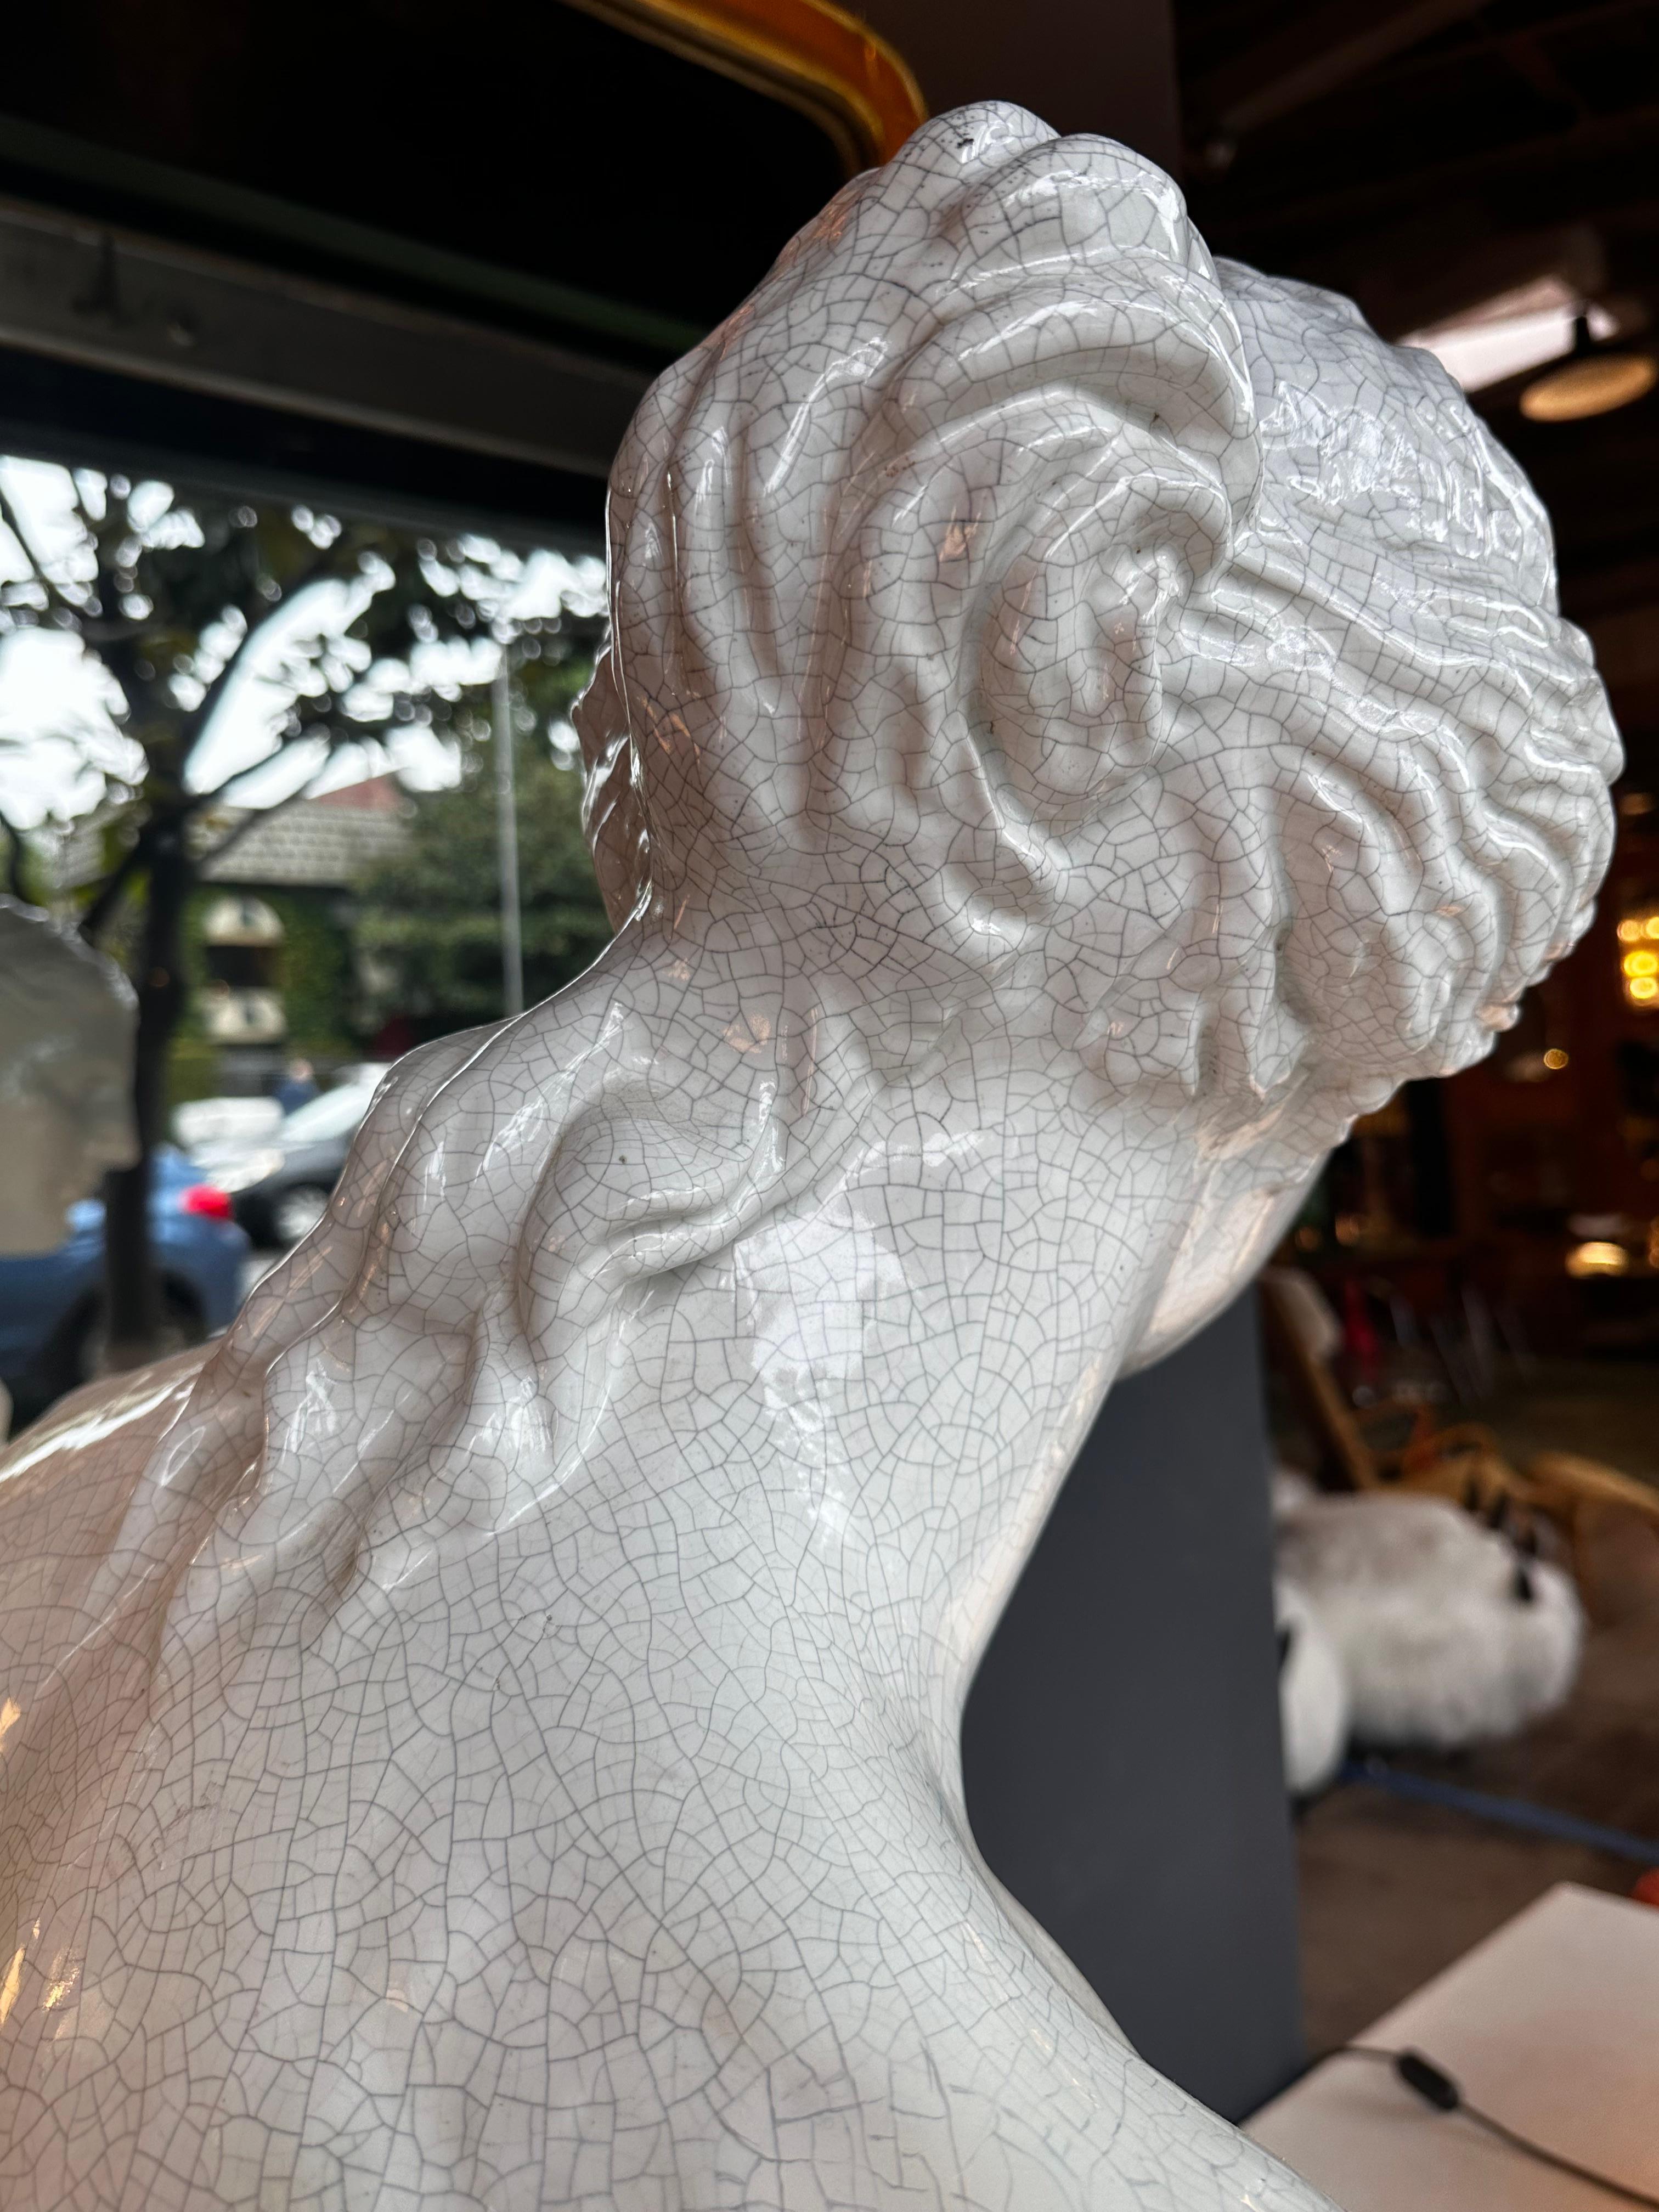 The Vintage Italian Porcelain Woman Sculpture from the 1970s is a graceful and timeless piece of art. Crafted in Italy, this sculpture features delicate porcelain work capturing the essence of a woman. The 1970s design elements add a touch of retro